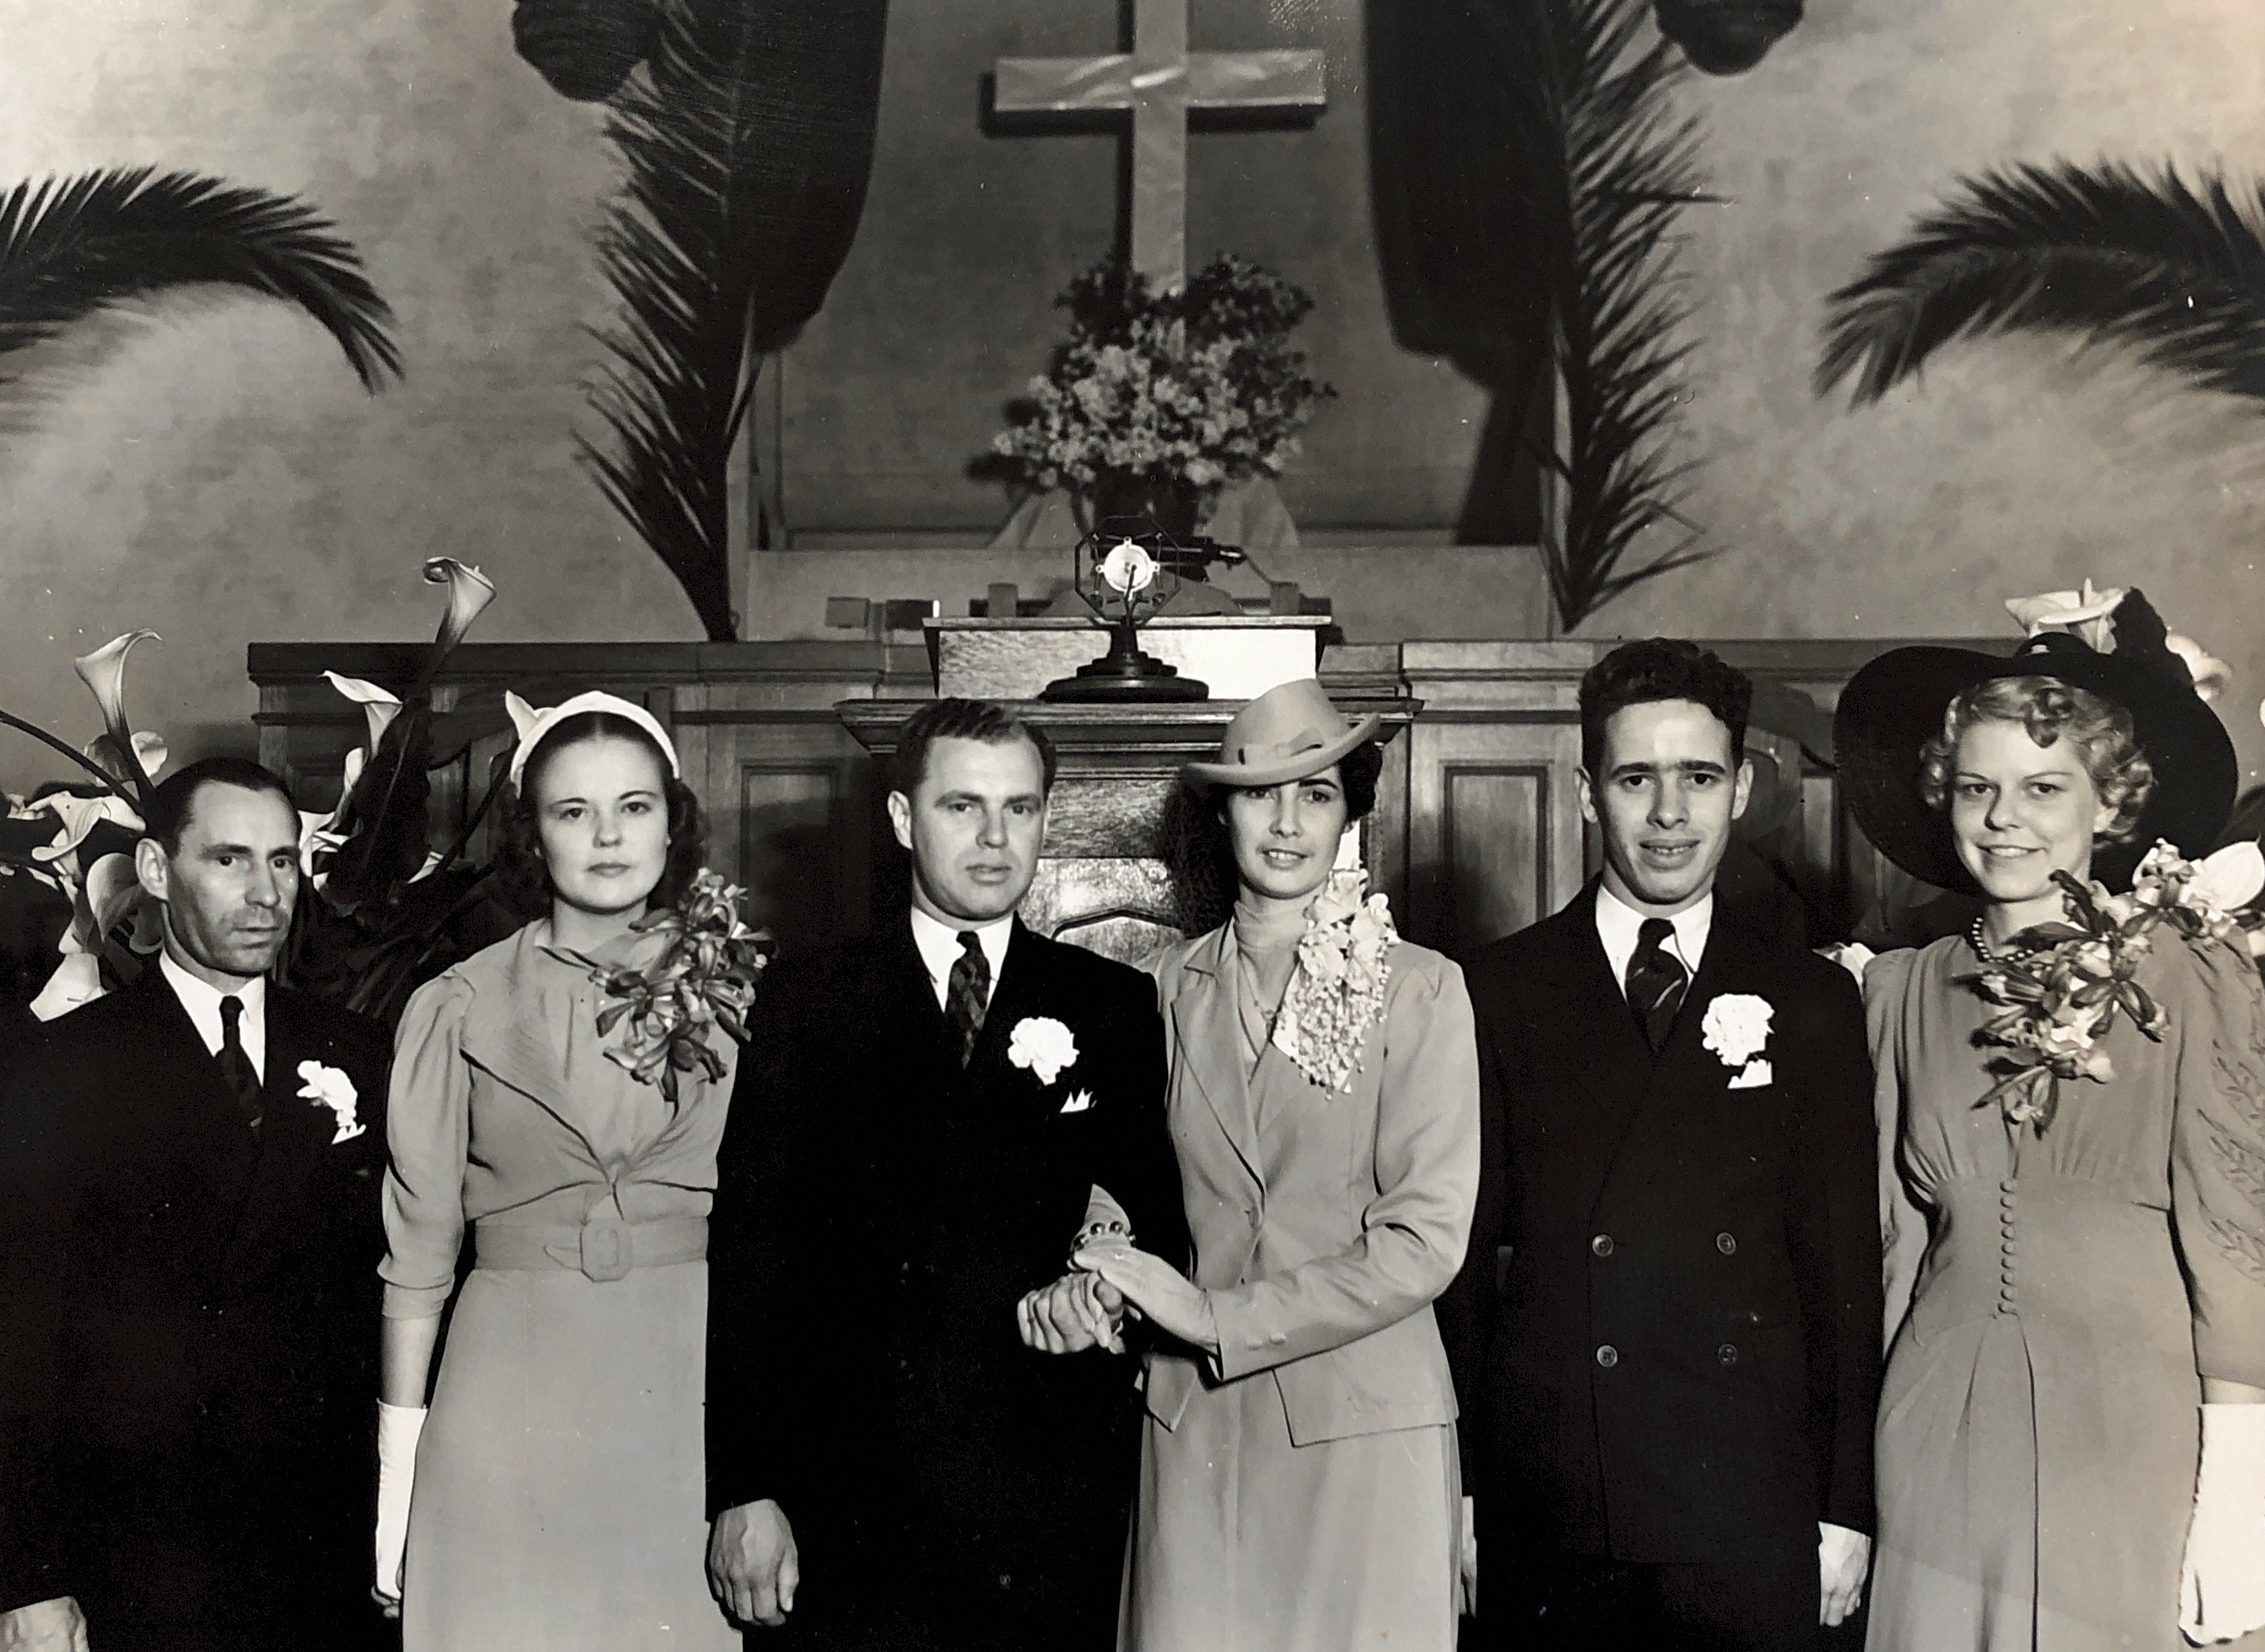 Irene and Lester Taylor wedding 1939 April 2